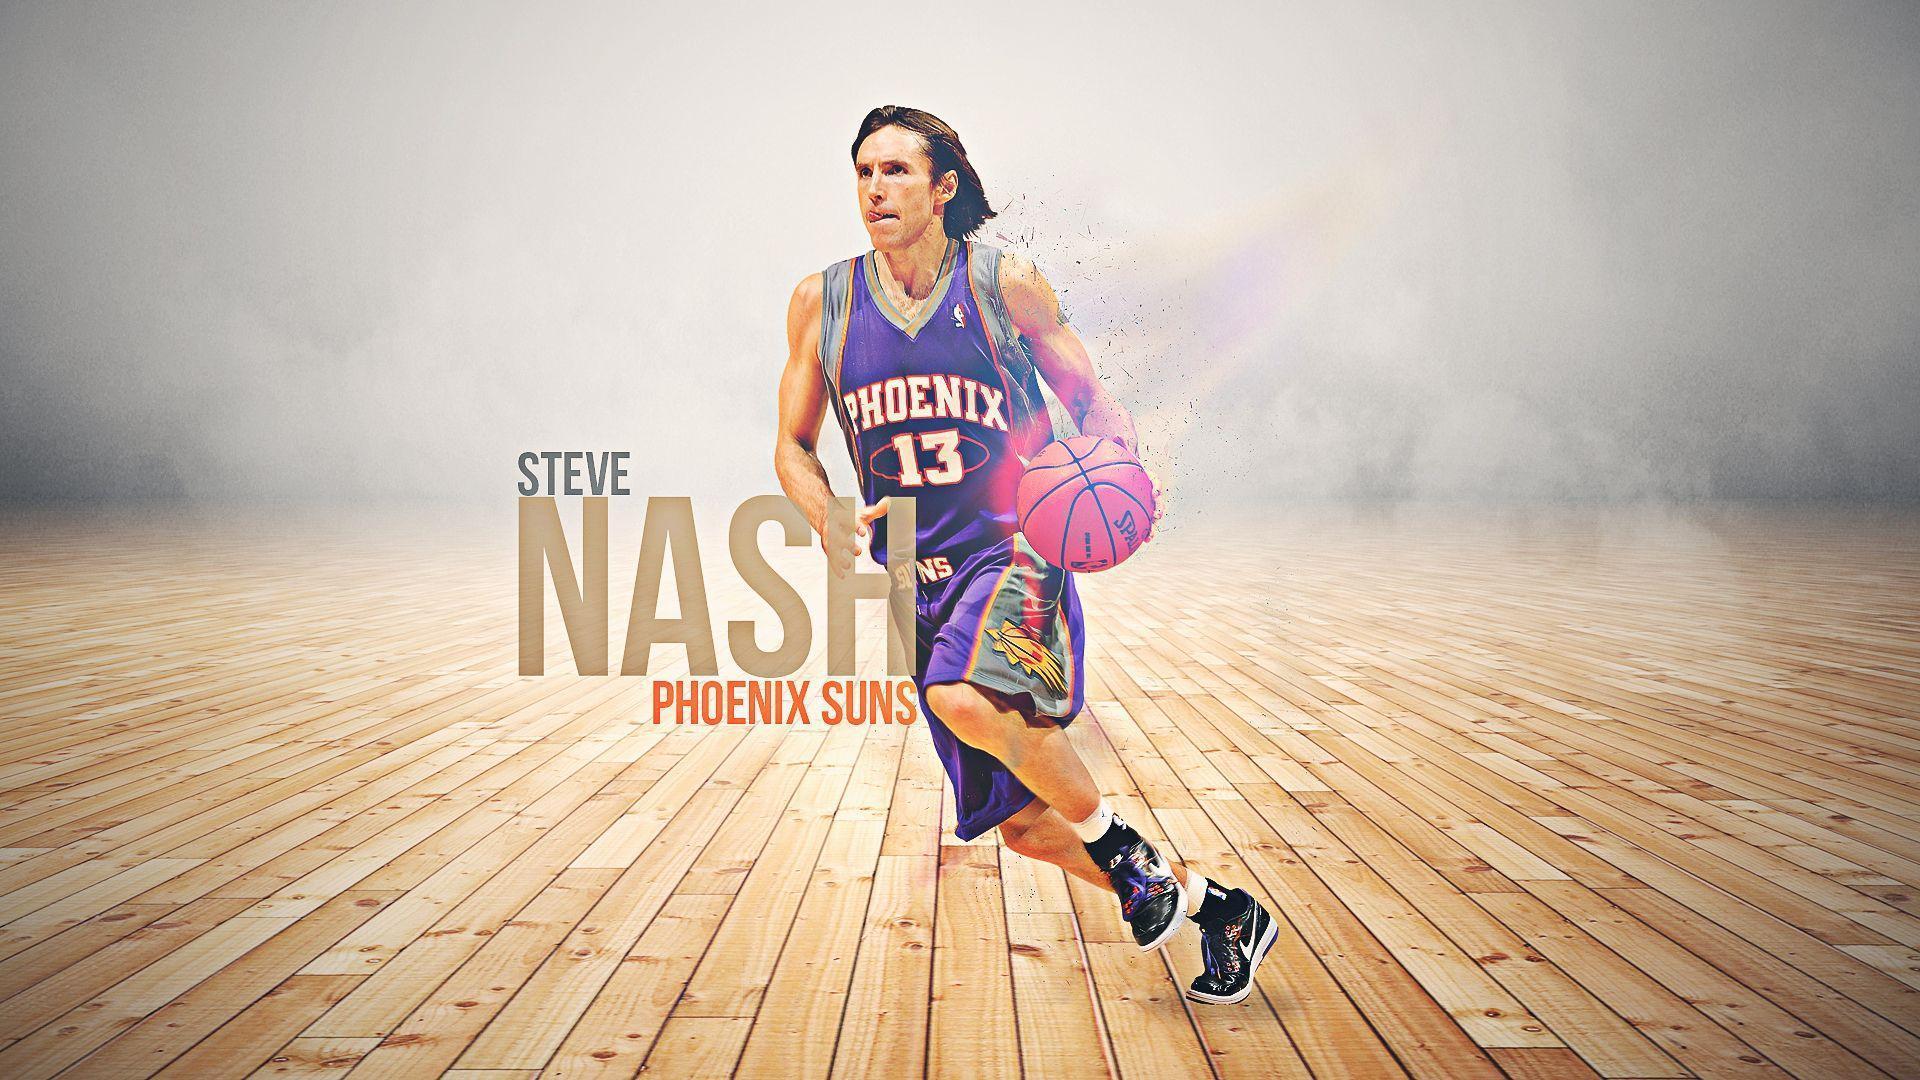 Steve Nash basketball player from Phoenix wallpaper and image